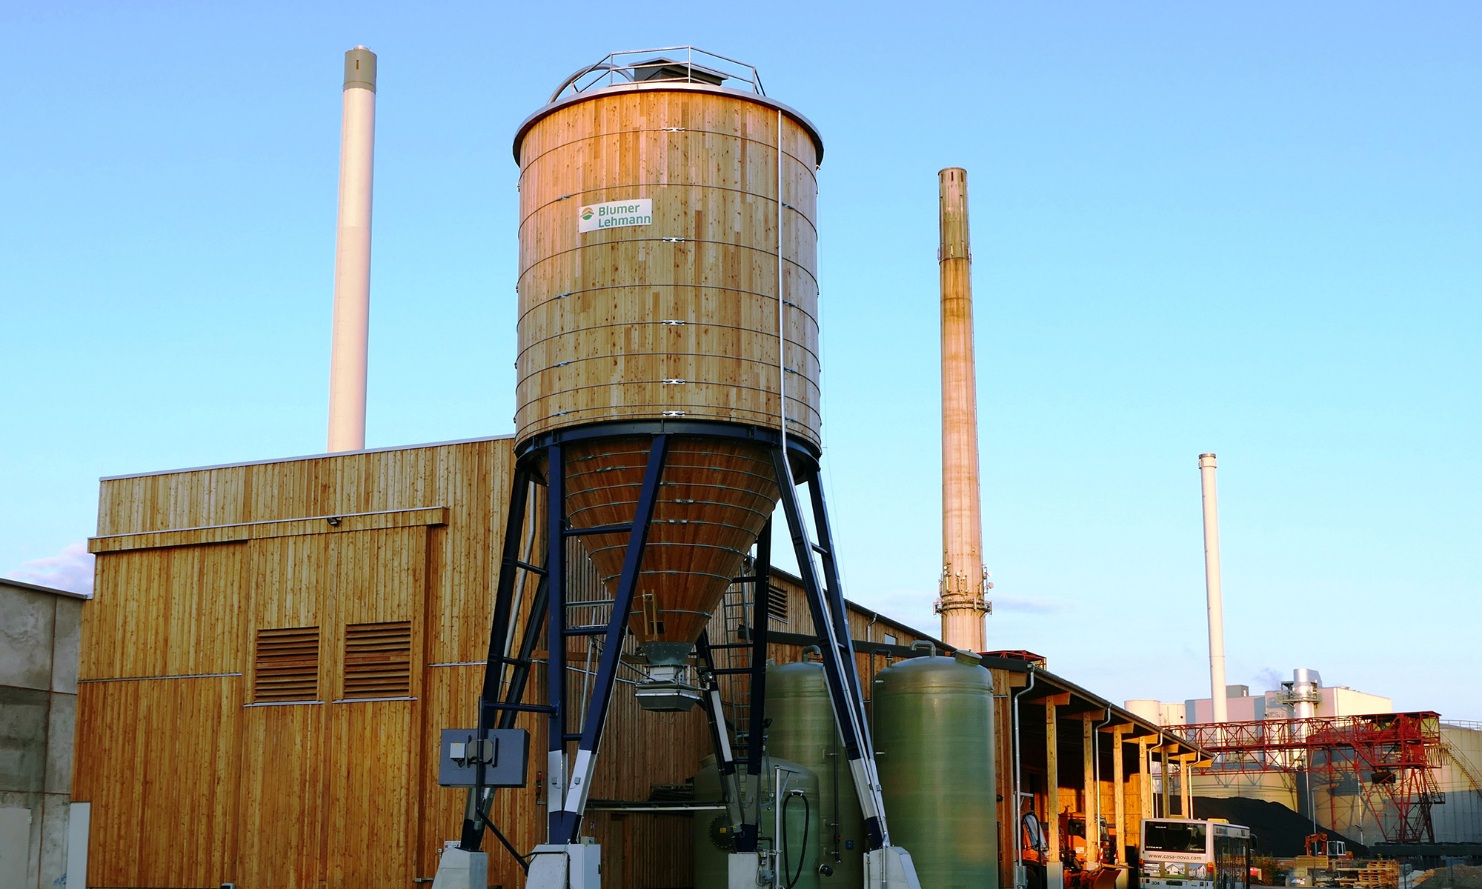 Complete facility in Ulm (Germany), comprising a salt storage depot, a timber silo and a brine facility